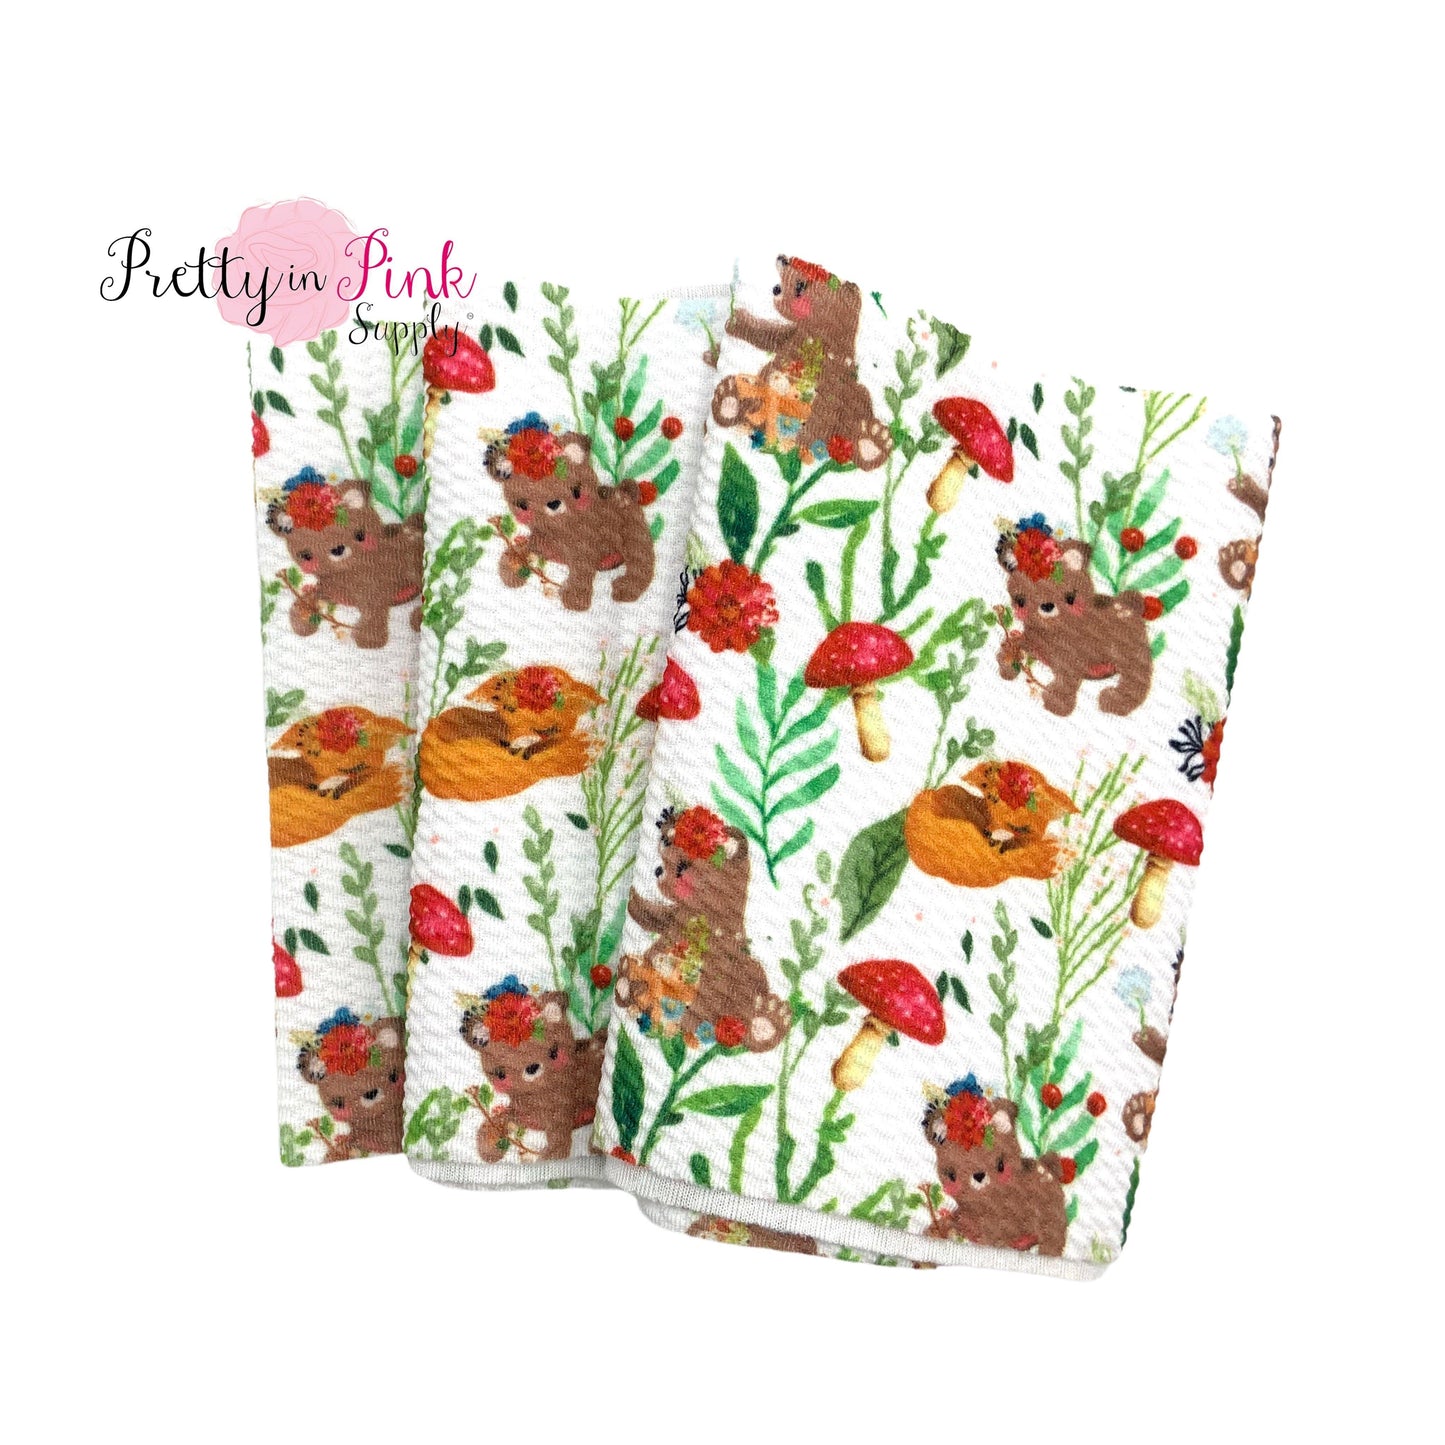 White Folded Fabric Strip with Bear, Fox, Mushroom, and Leaves Pattern